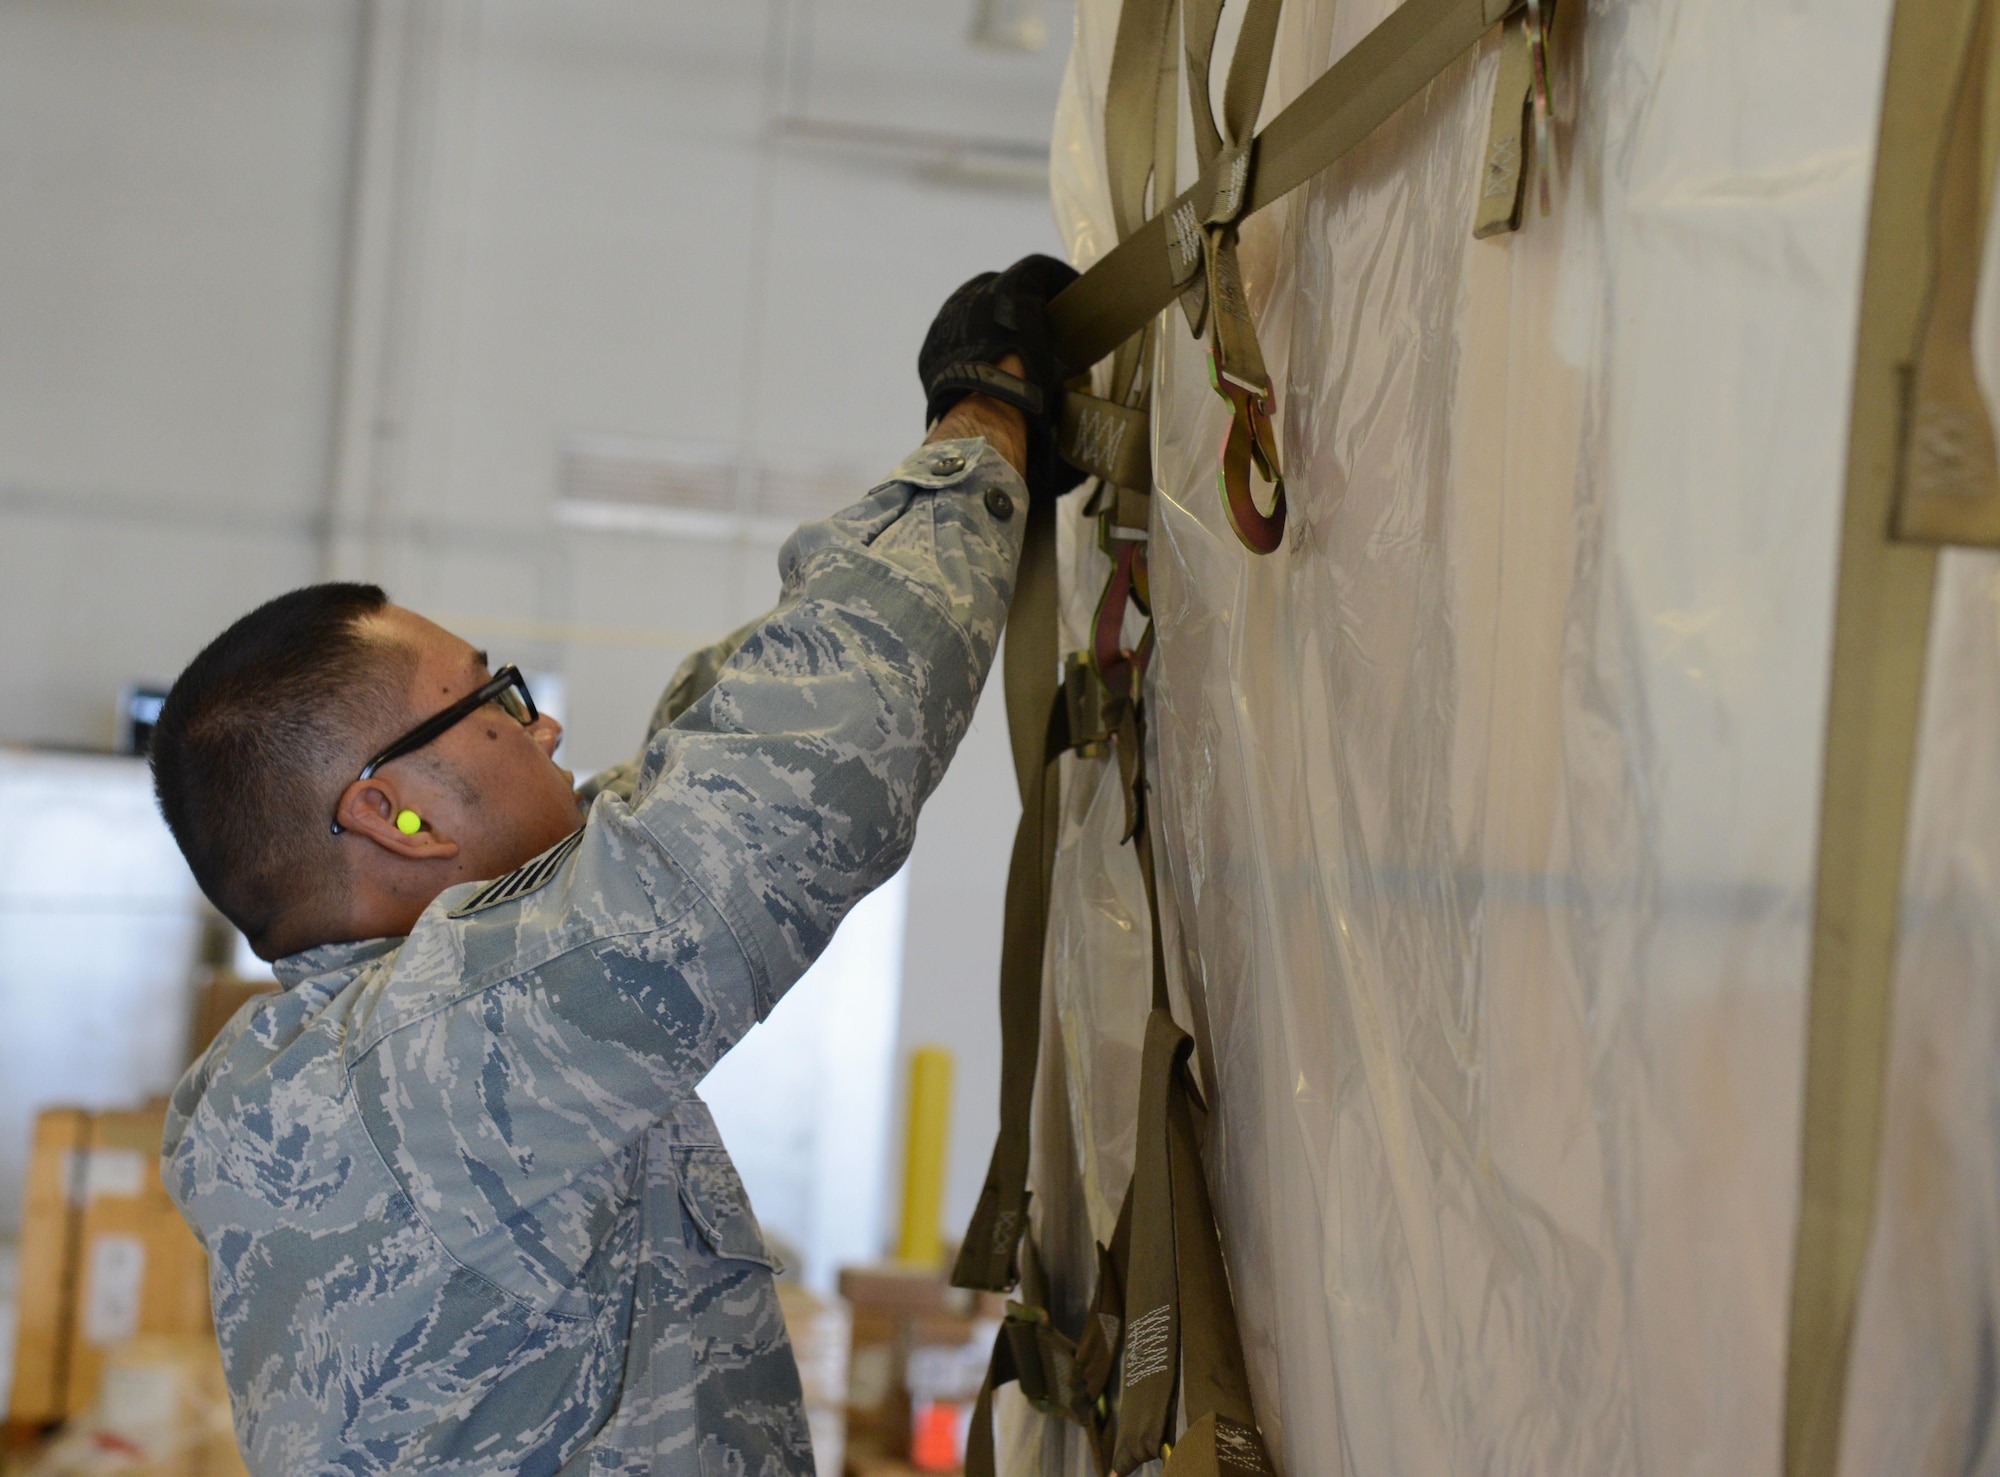 Tech. Sgt. Rolando Jose, 44th Aerial Port Squadron air transportation special handler, breaks down a cargo pallet May 2, 2016, at Andersen Air Force Base, Guam. Jose serves in the U.S. Air Force Reserve and works in a civilian capacity at Antonio B. Won Pat International Airport as a Transportation Security Administration agent. (U.S. Air Force photo by Airman 1st Class Arielle Vasquez/Released)